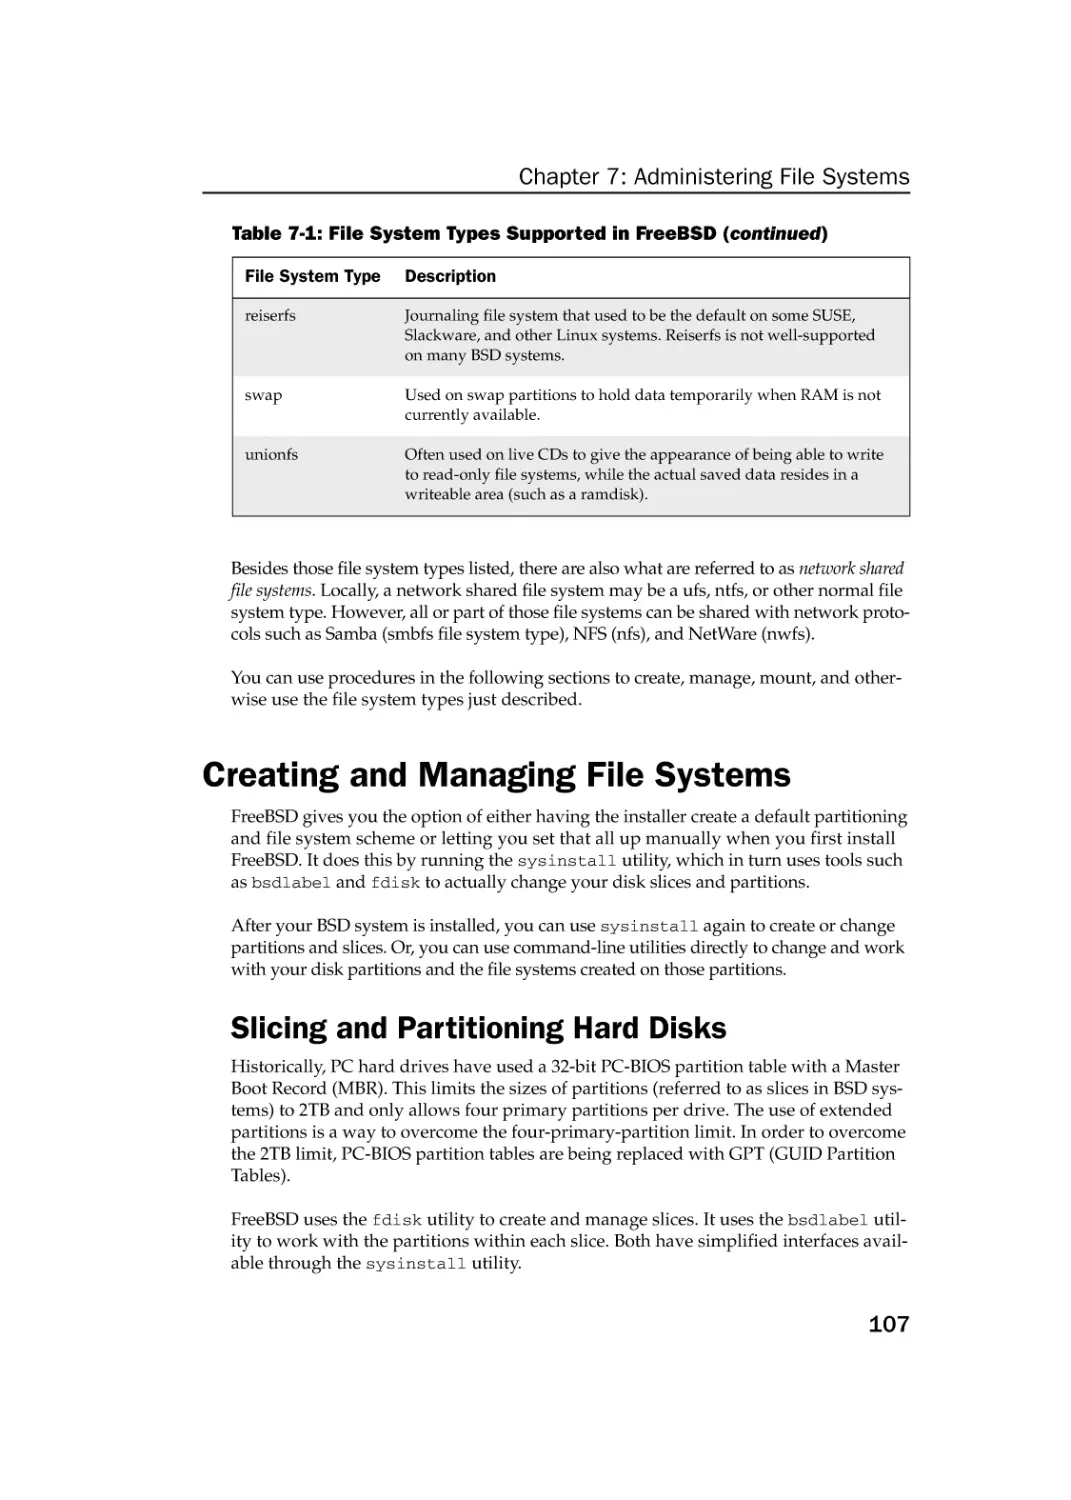 Creating and Managing File Systems